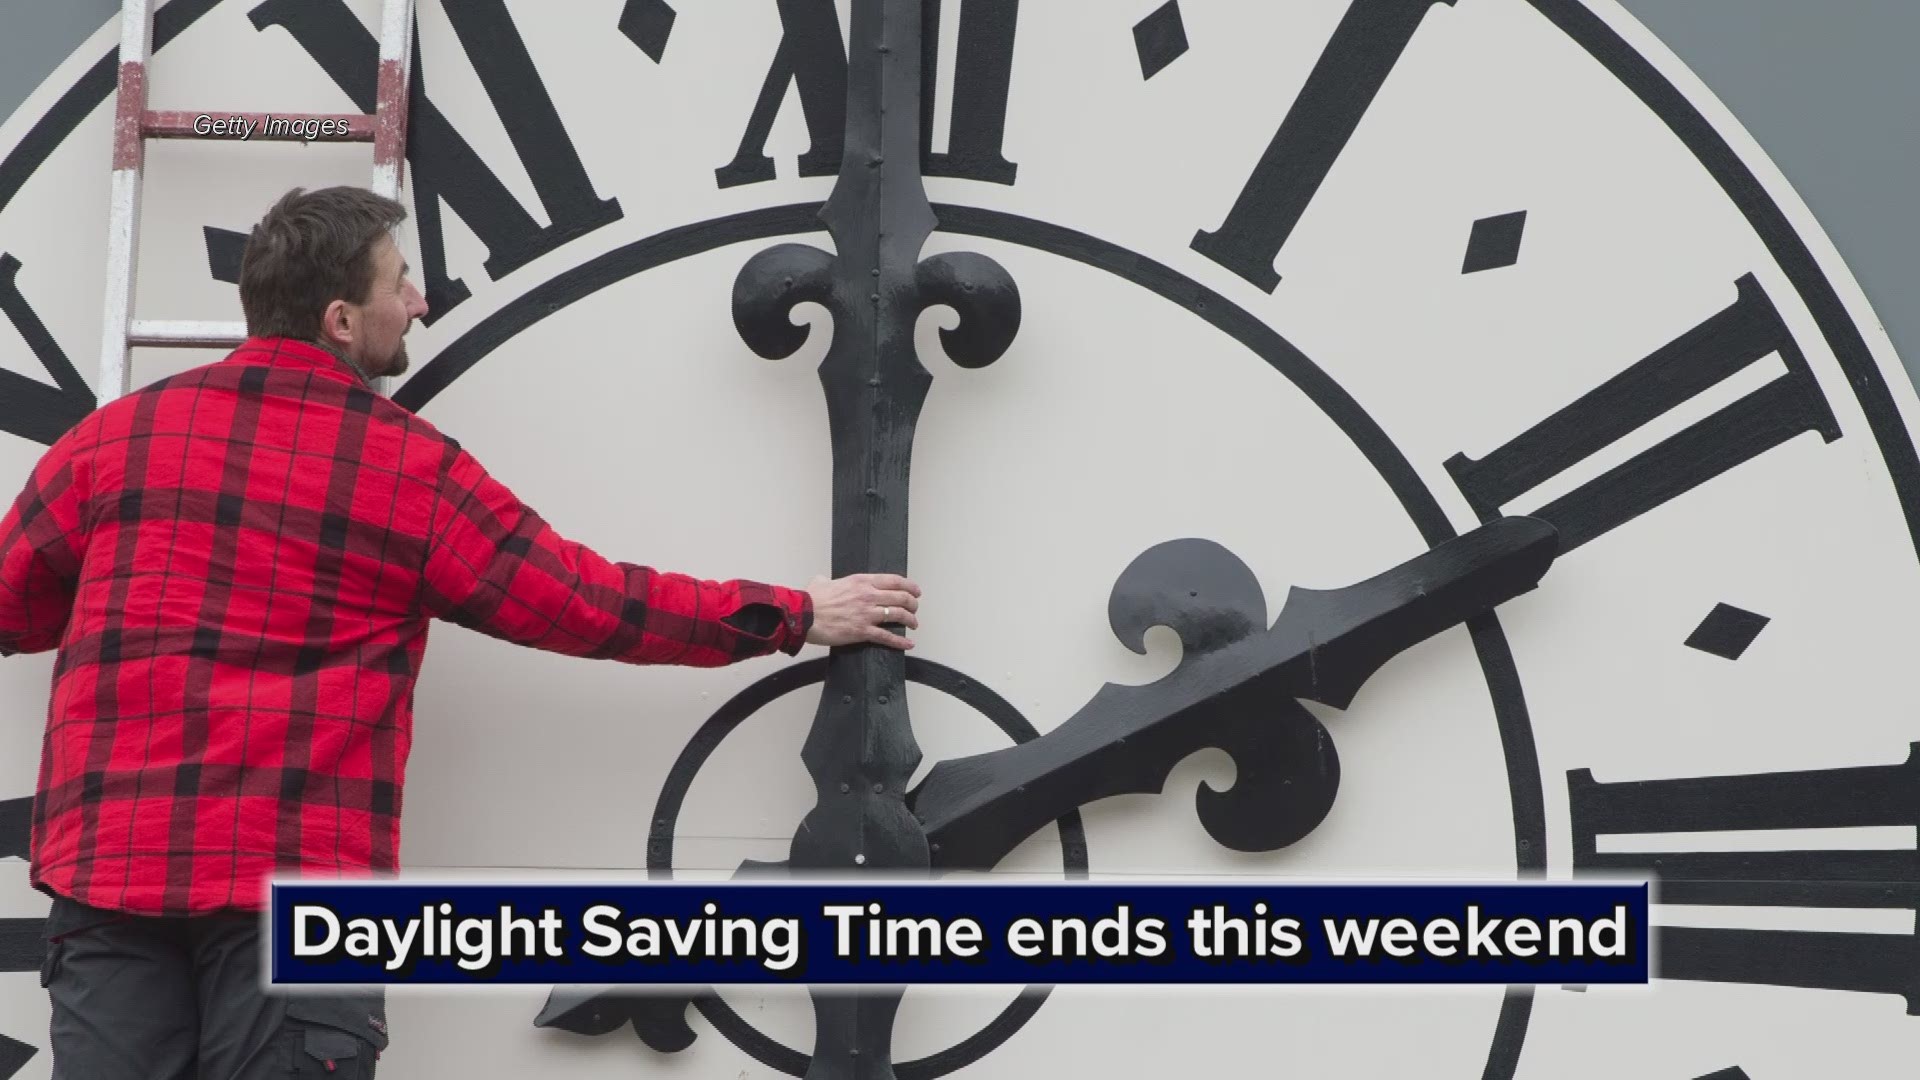 Daylight Saving Time ends this weekend: Don't forget to change your clocks